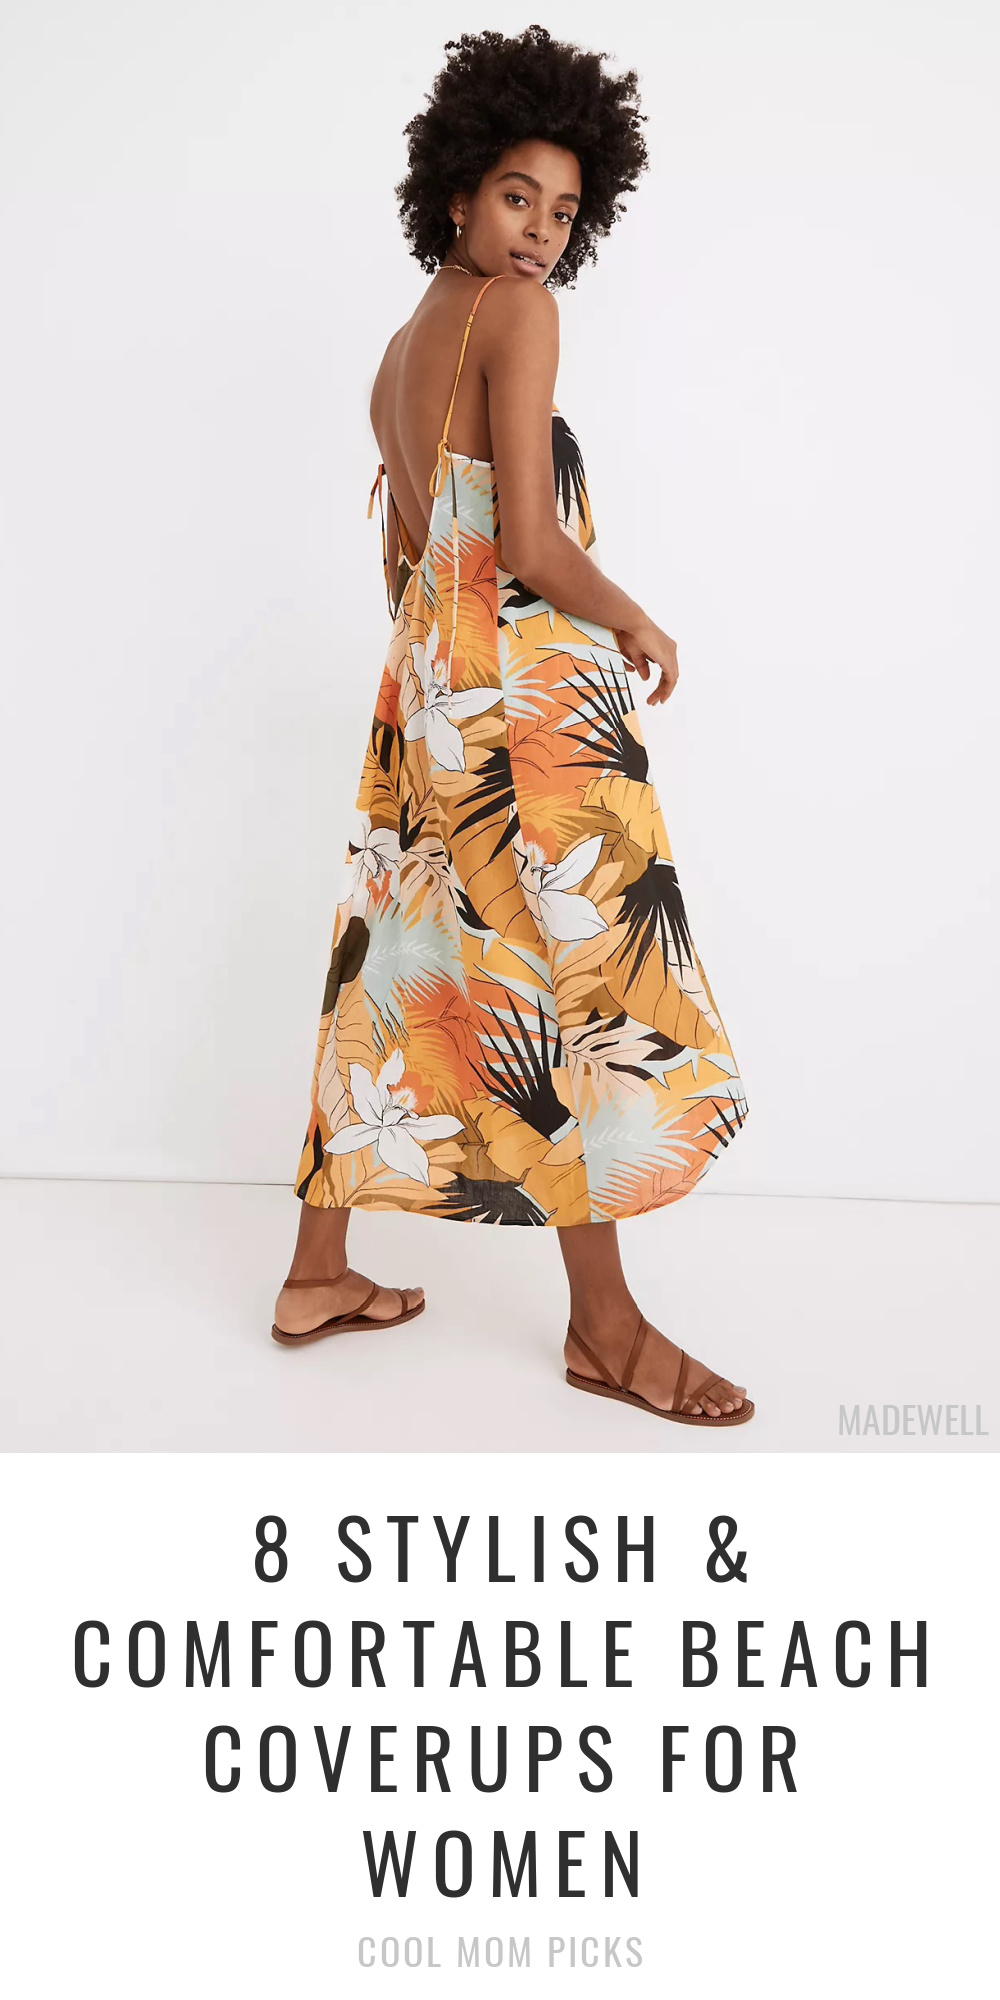 8 Stylish and comfortable beach coverups for women at Cool Mom Picks